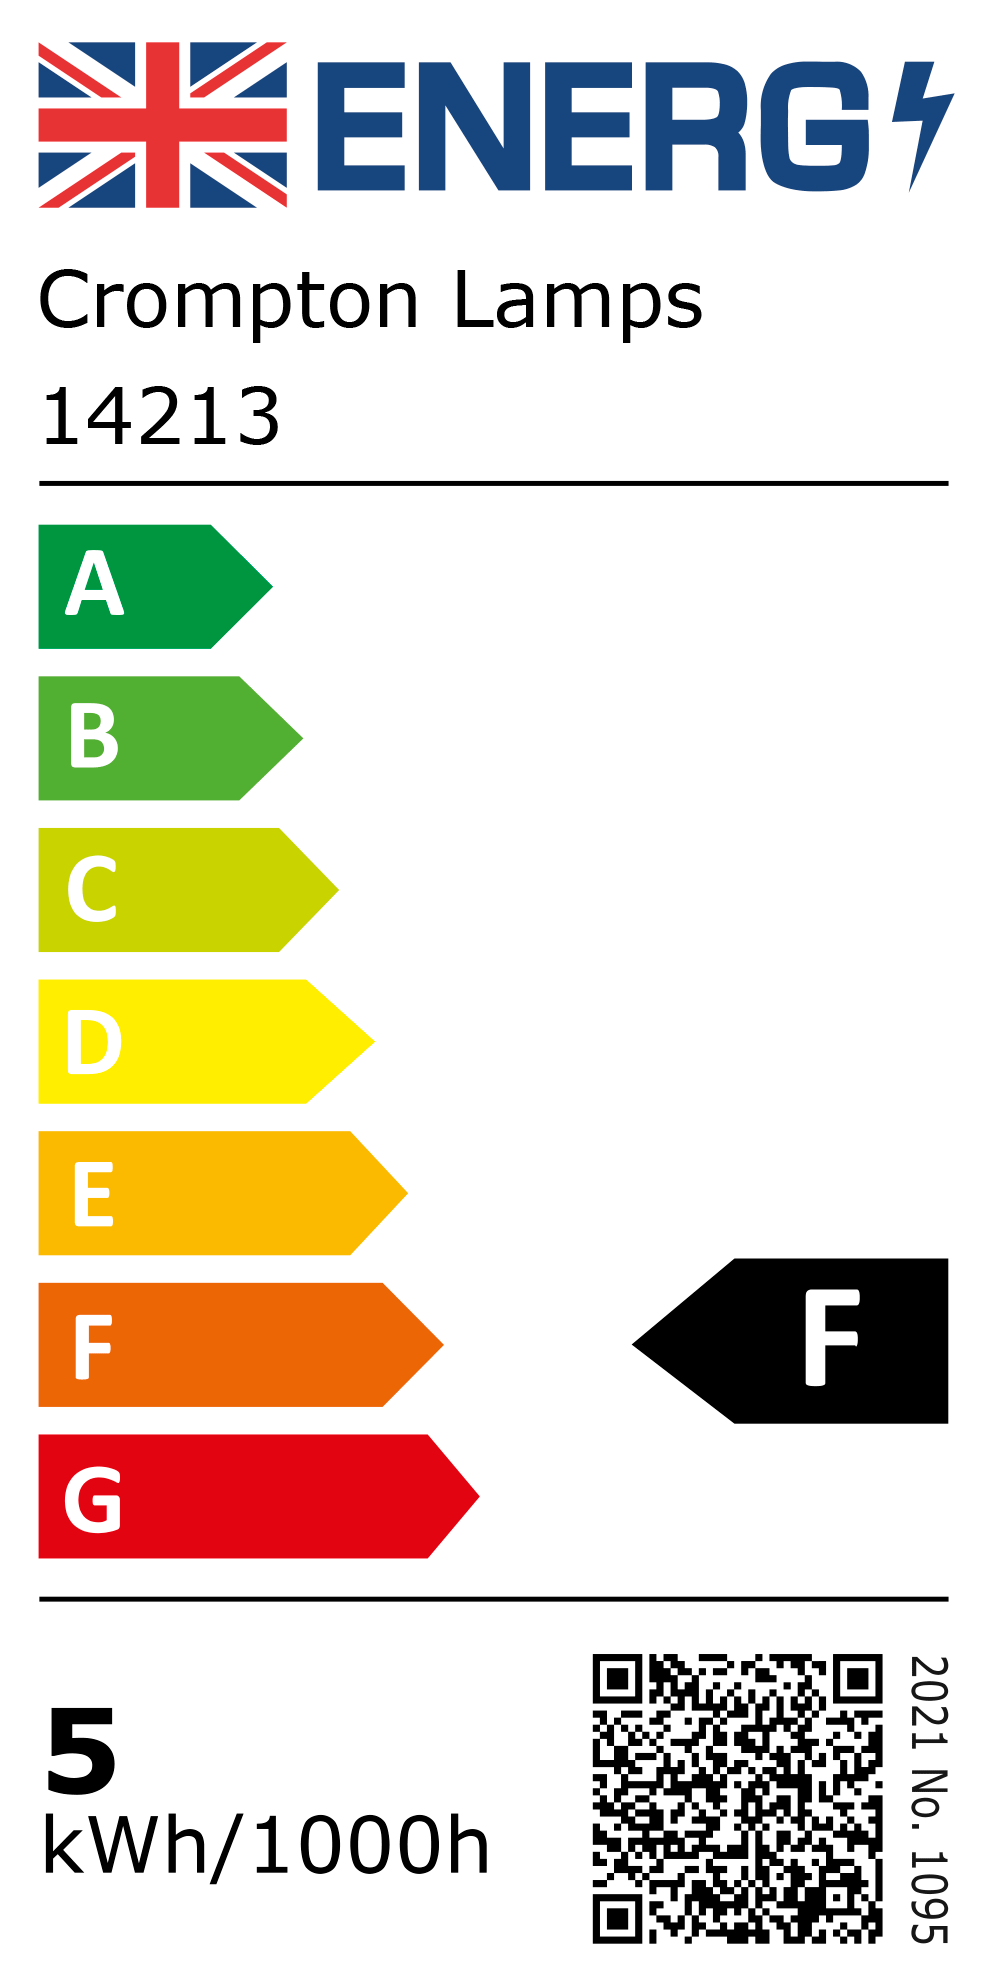 New 2021 Energy Rating Label: Stock Code 14213